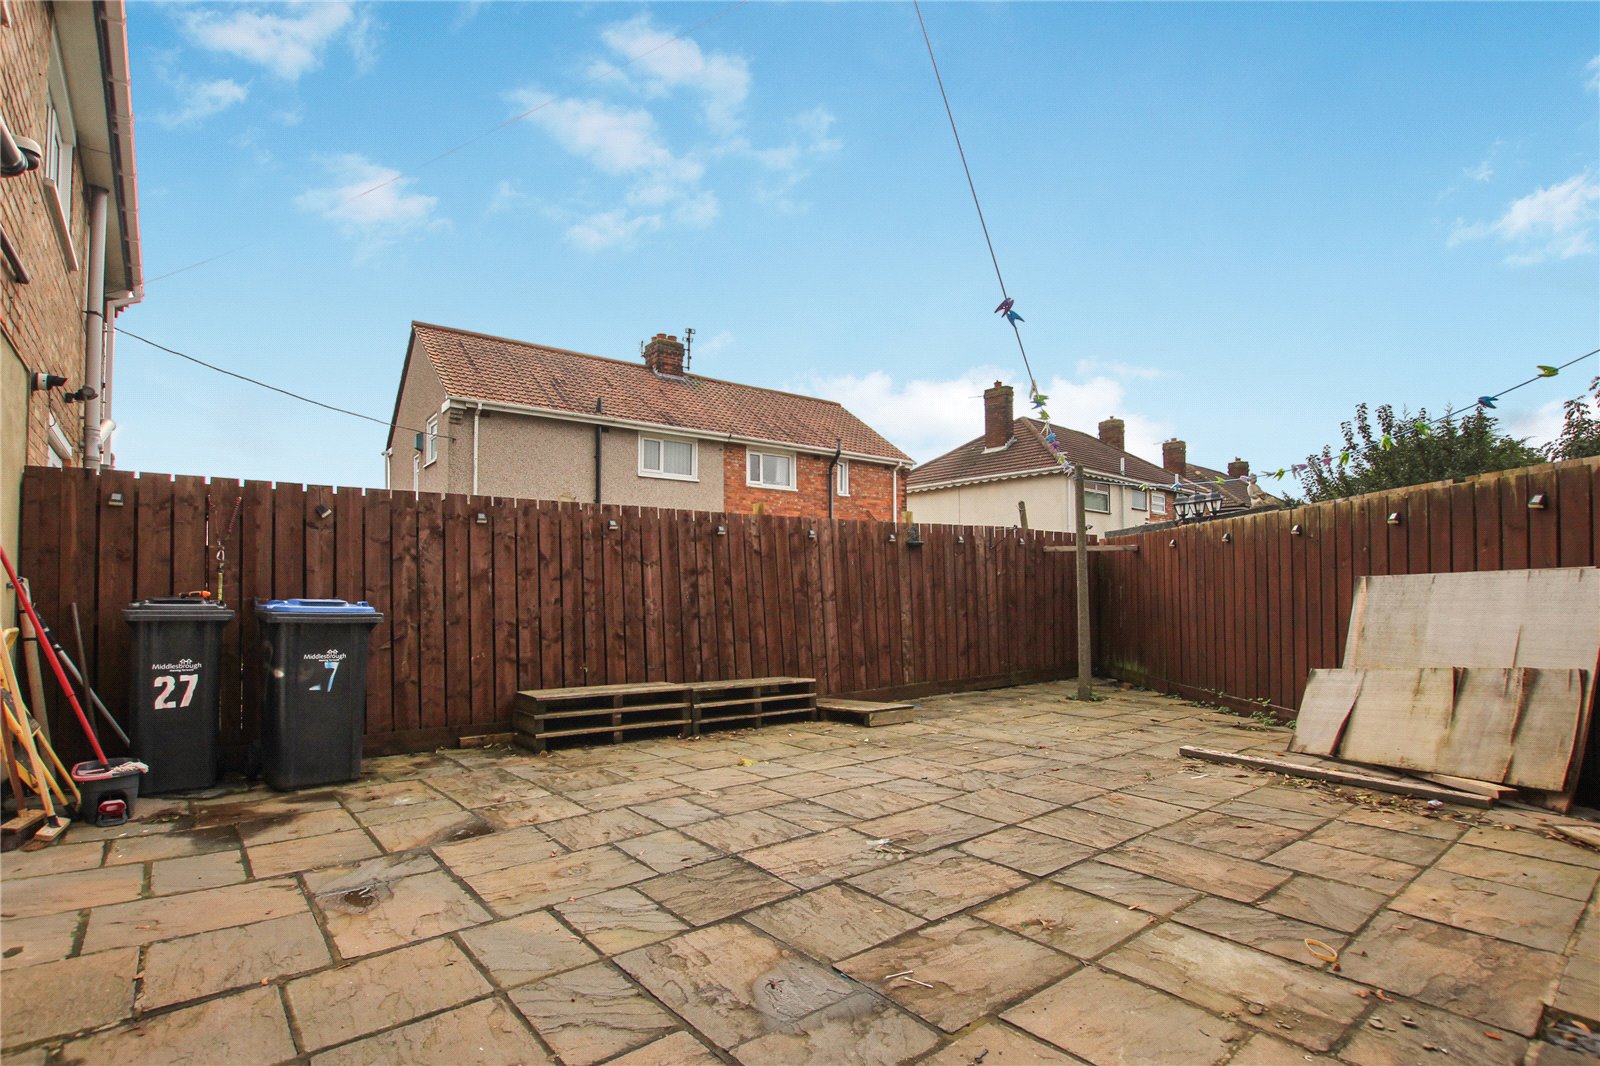 3 bed  for sale in Kelvin Grove, Park End  - Property Image 17